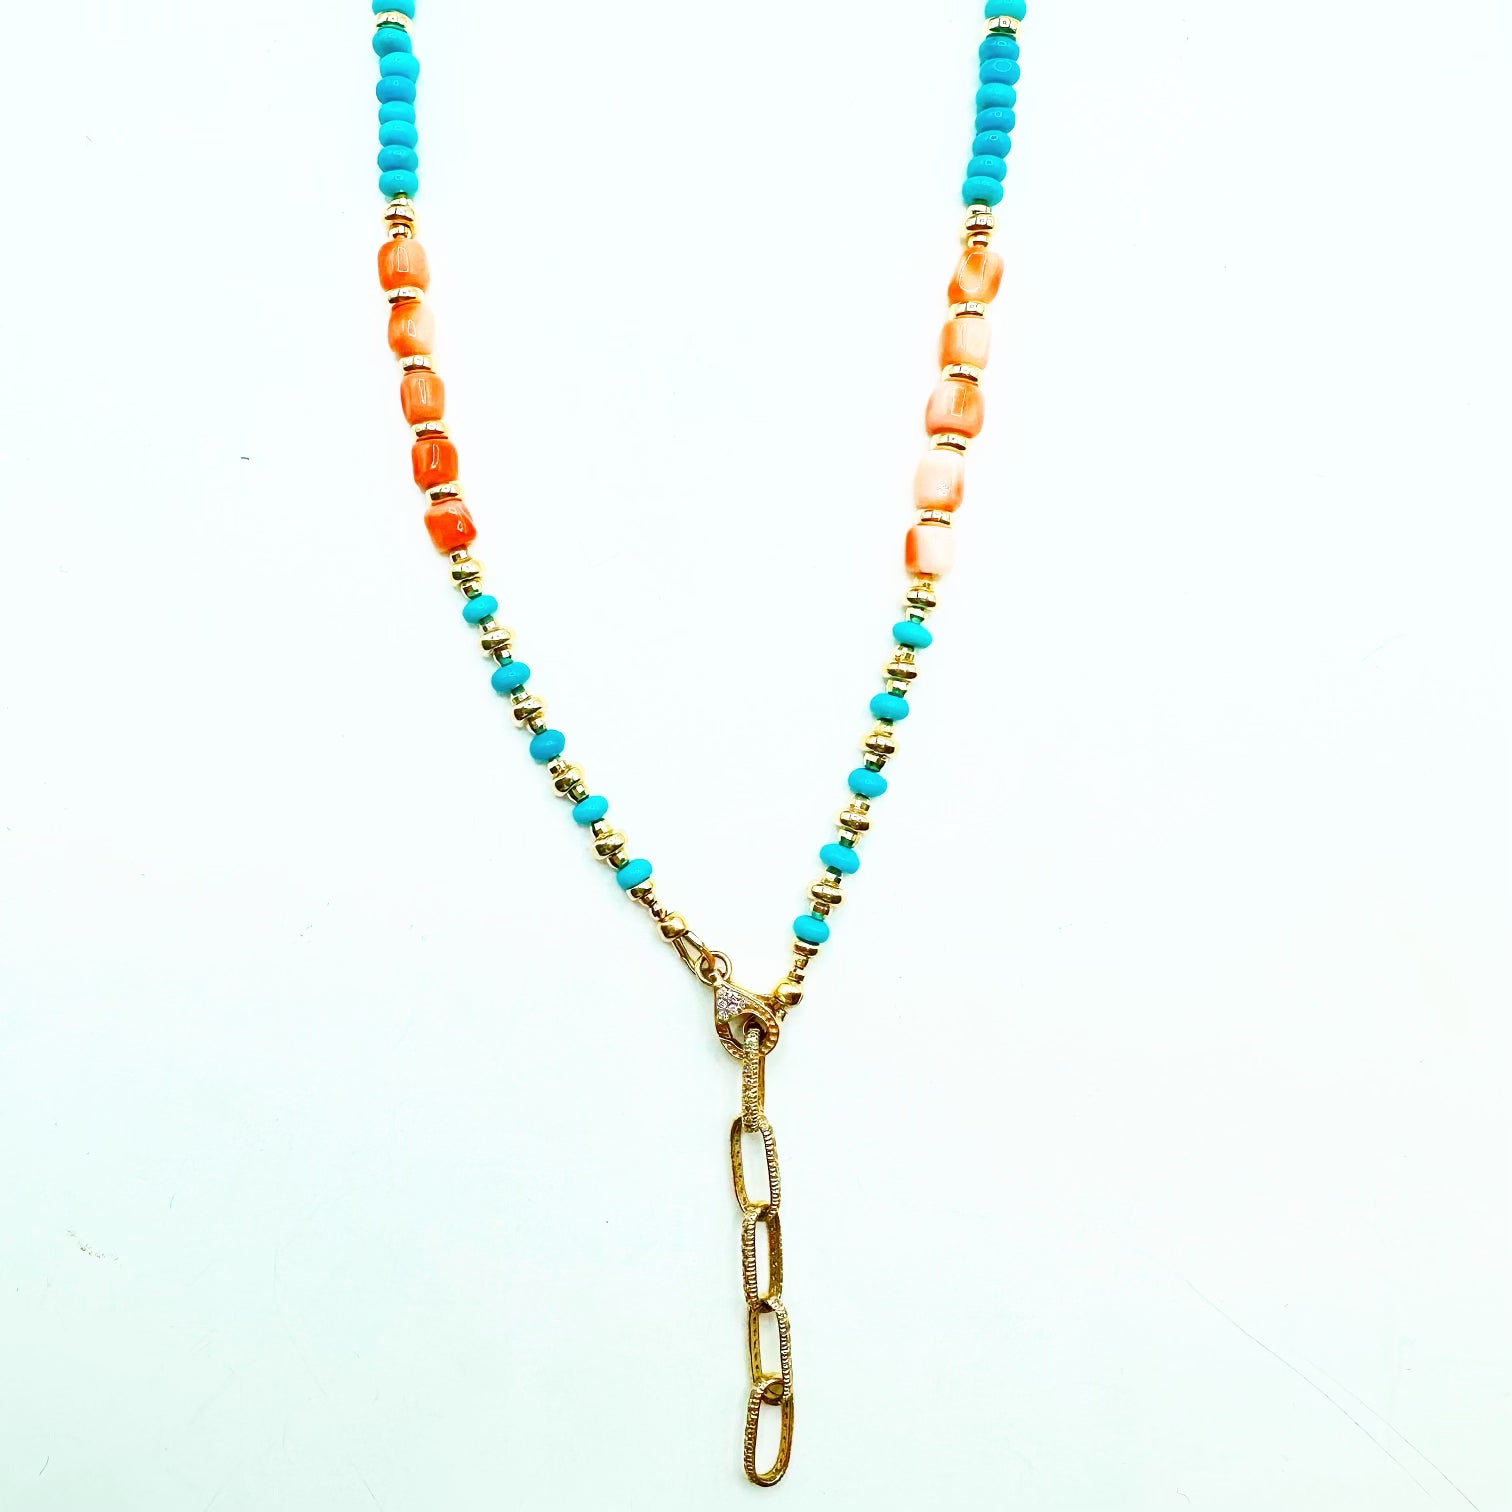 14K GOLD TURQUOISE & CORAL NECKLACE WITH DIAMOND LINK CHAIN